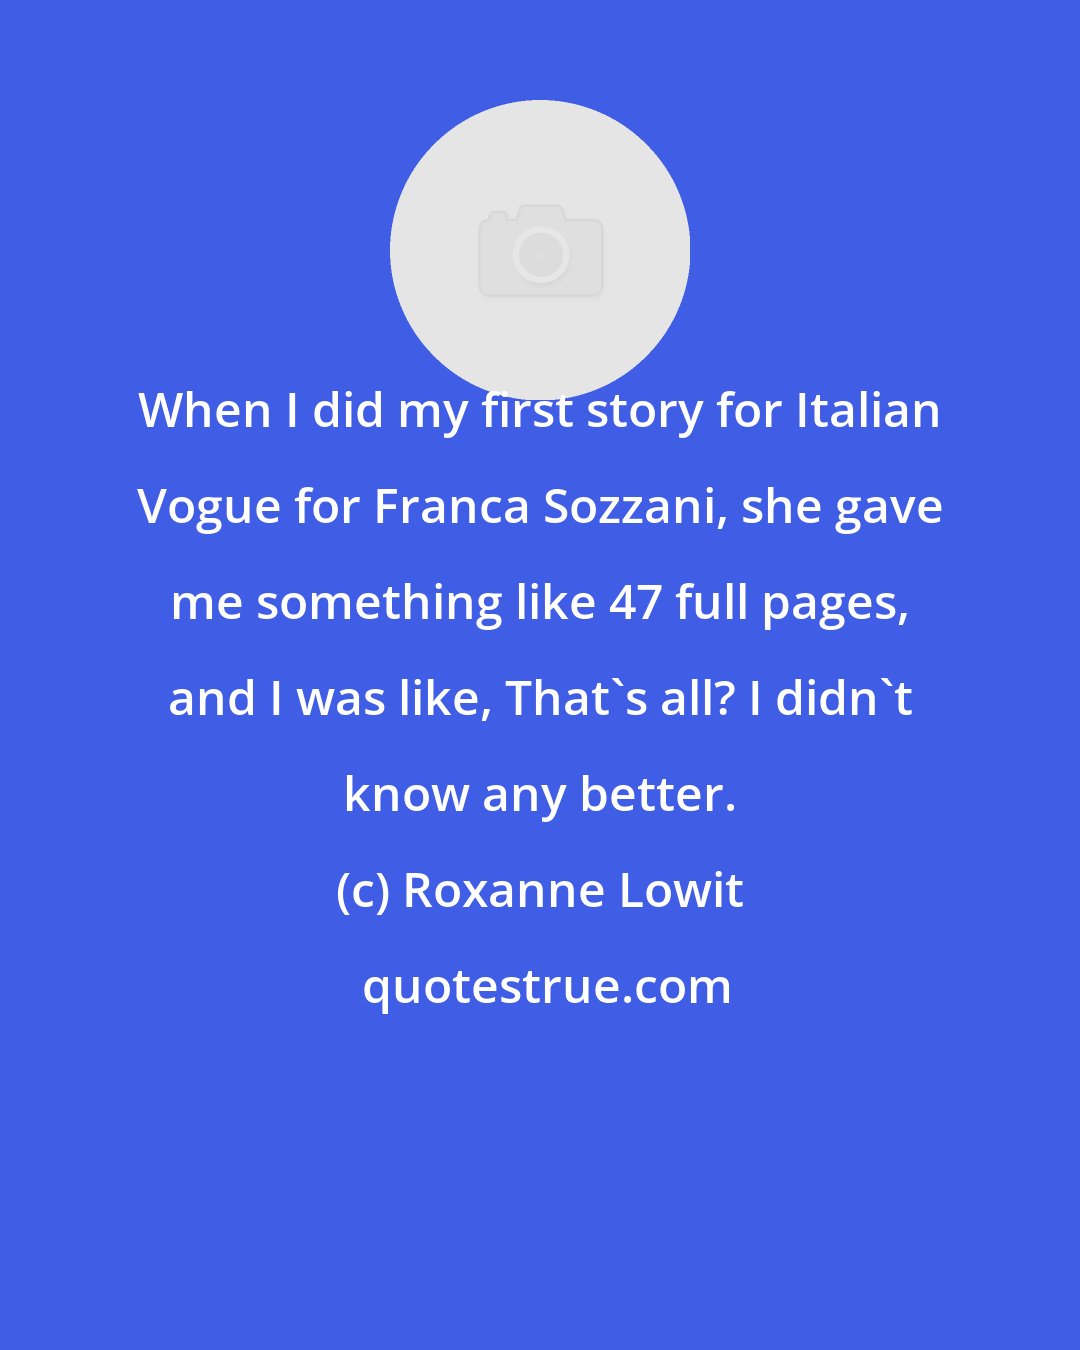 Roxanne Lowit: When I did my first story for Italian Vogue for Franca Sozzani, she gave me something like 47 full pages, and I was like, That's all? I didn't know any better.